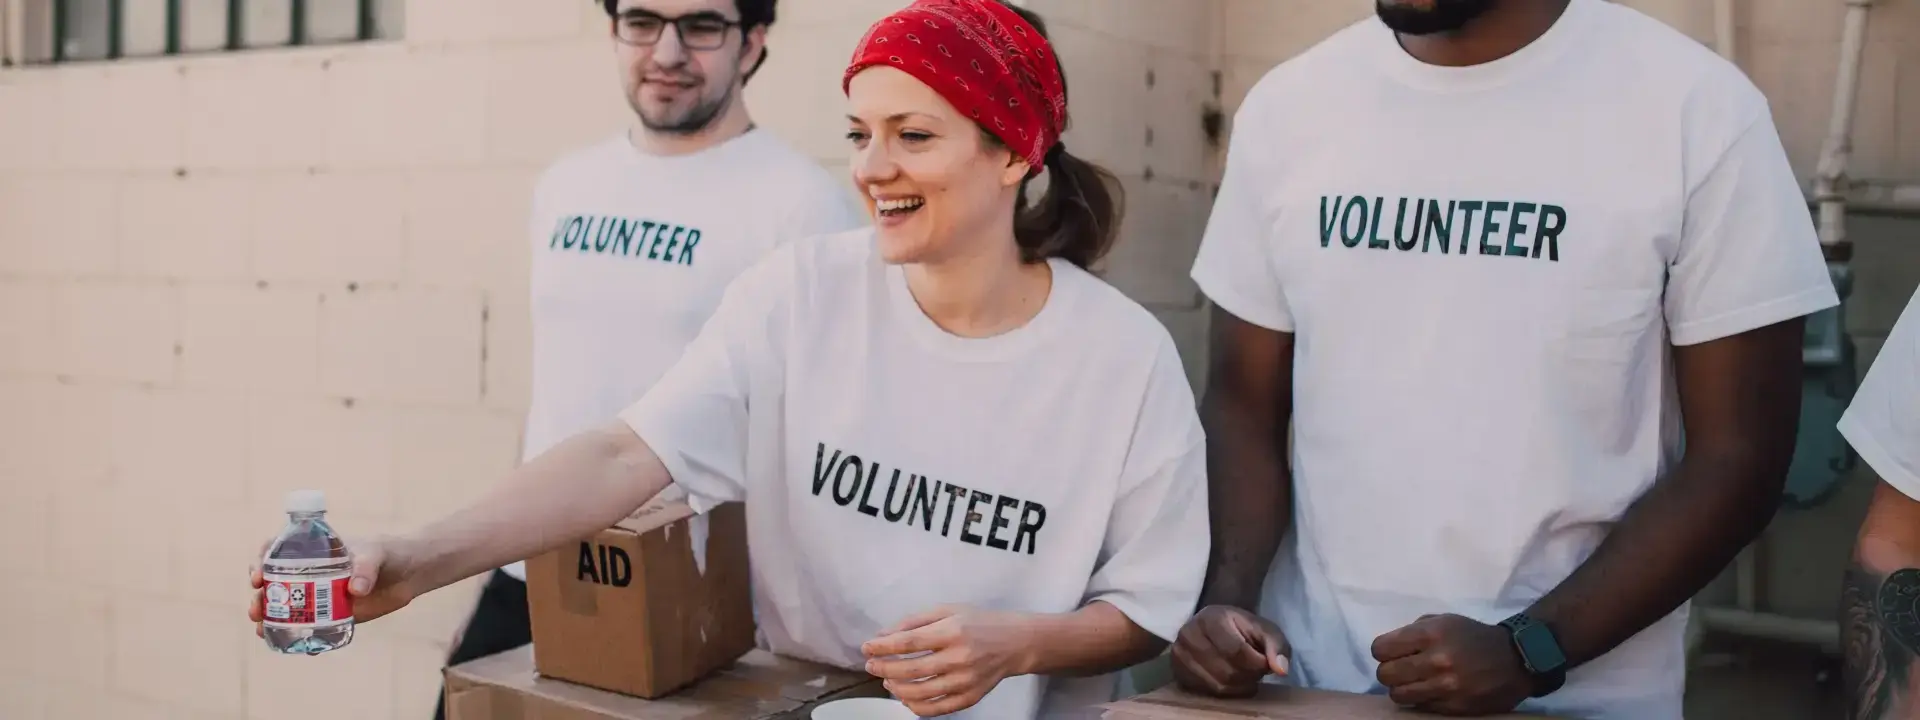 How to Become a Volunteer: A Step-by-Step Guide